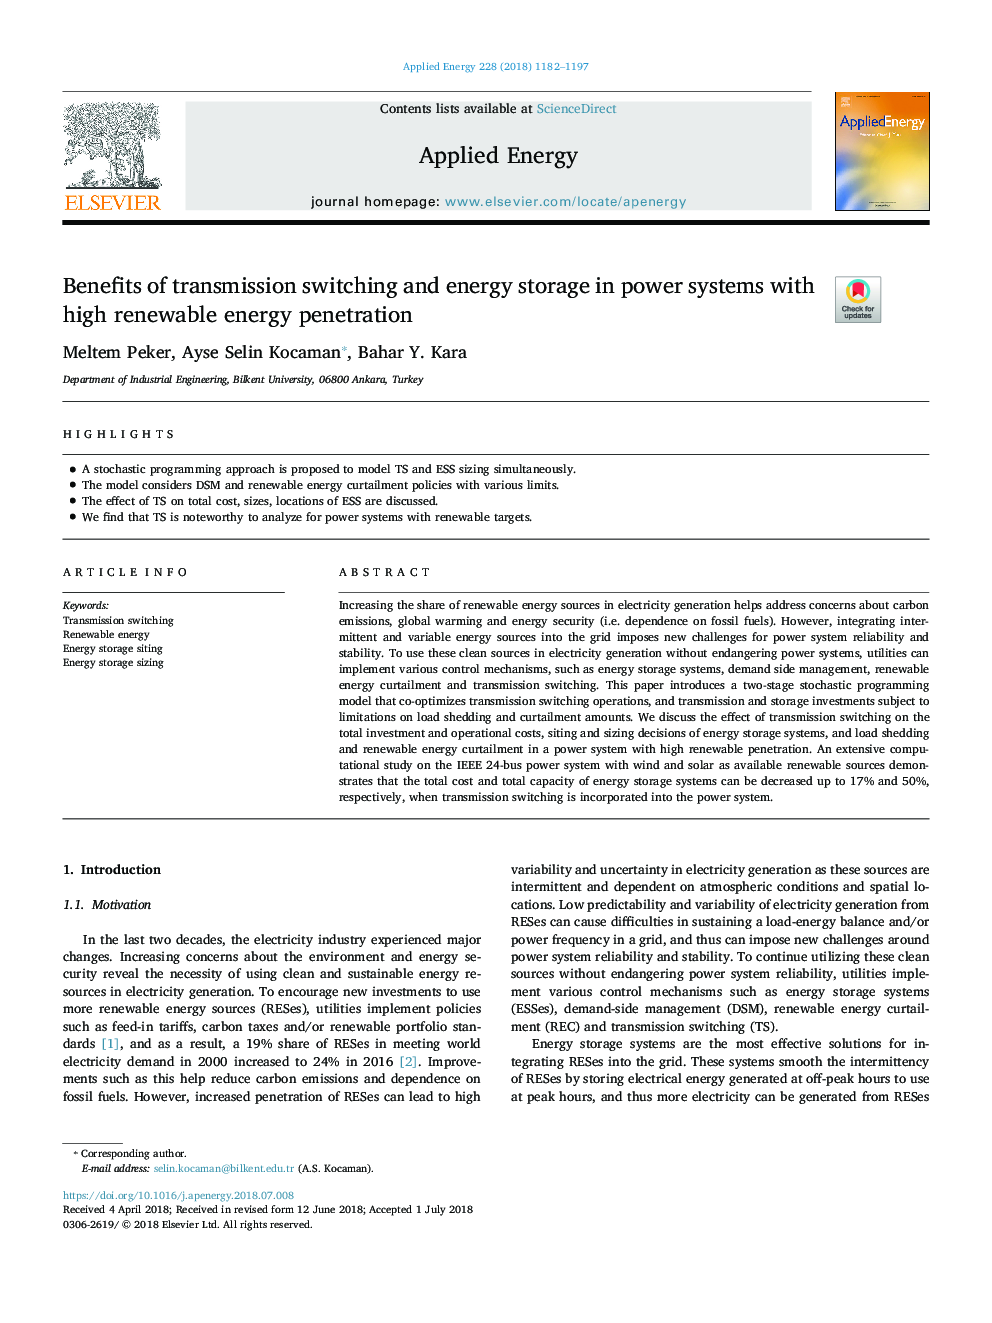 Benefits of transmission switching and energy storage in power systems with high renewable energy penetration